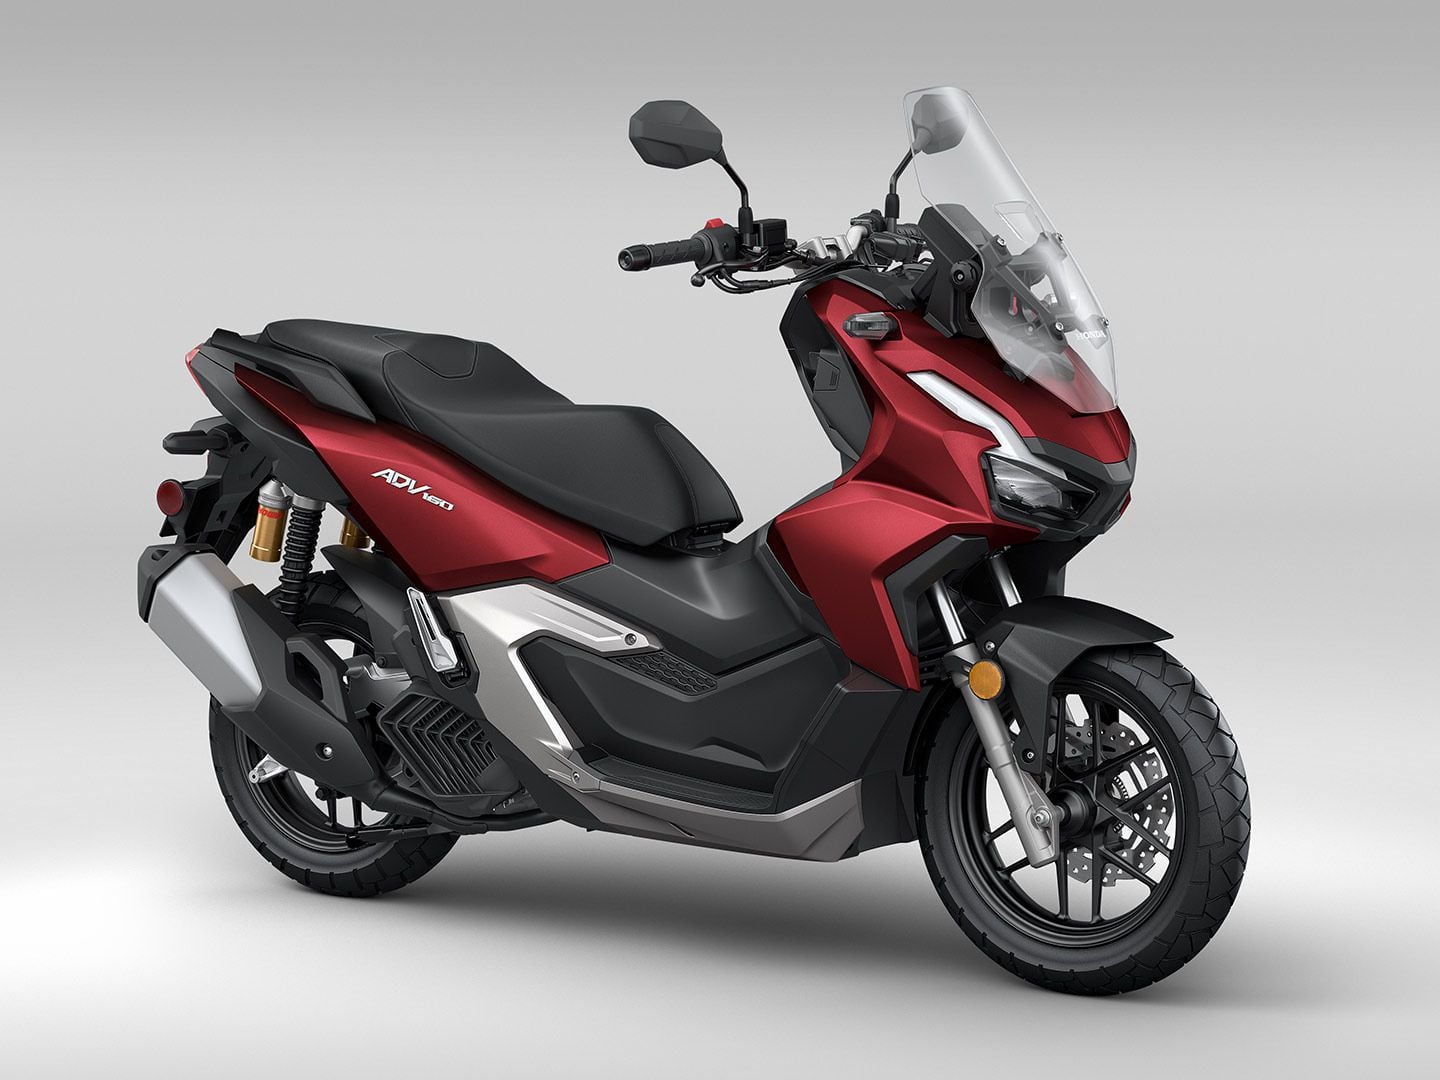 The 2024 Honda ADV160 with Showa shocks and suspension, front and back. Here shown in Red Metallic color.